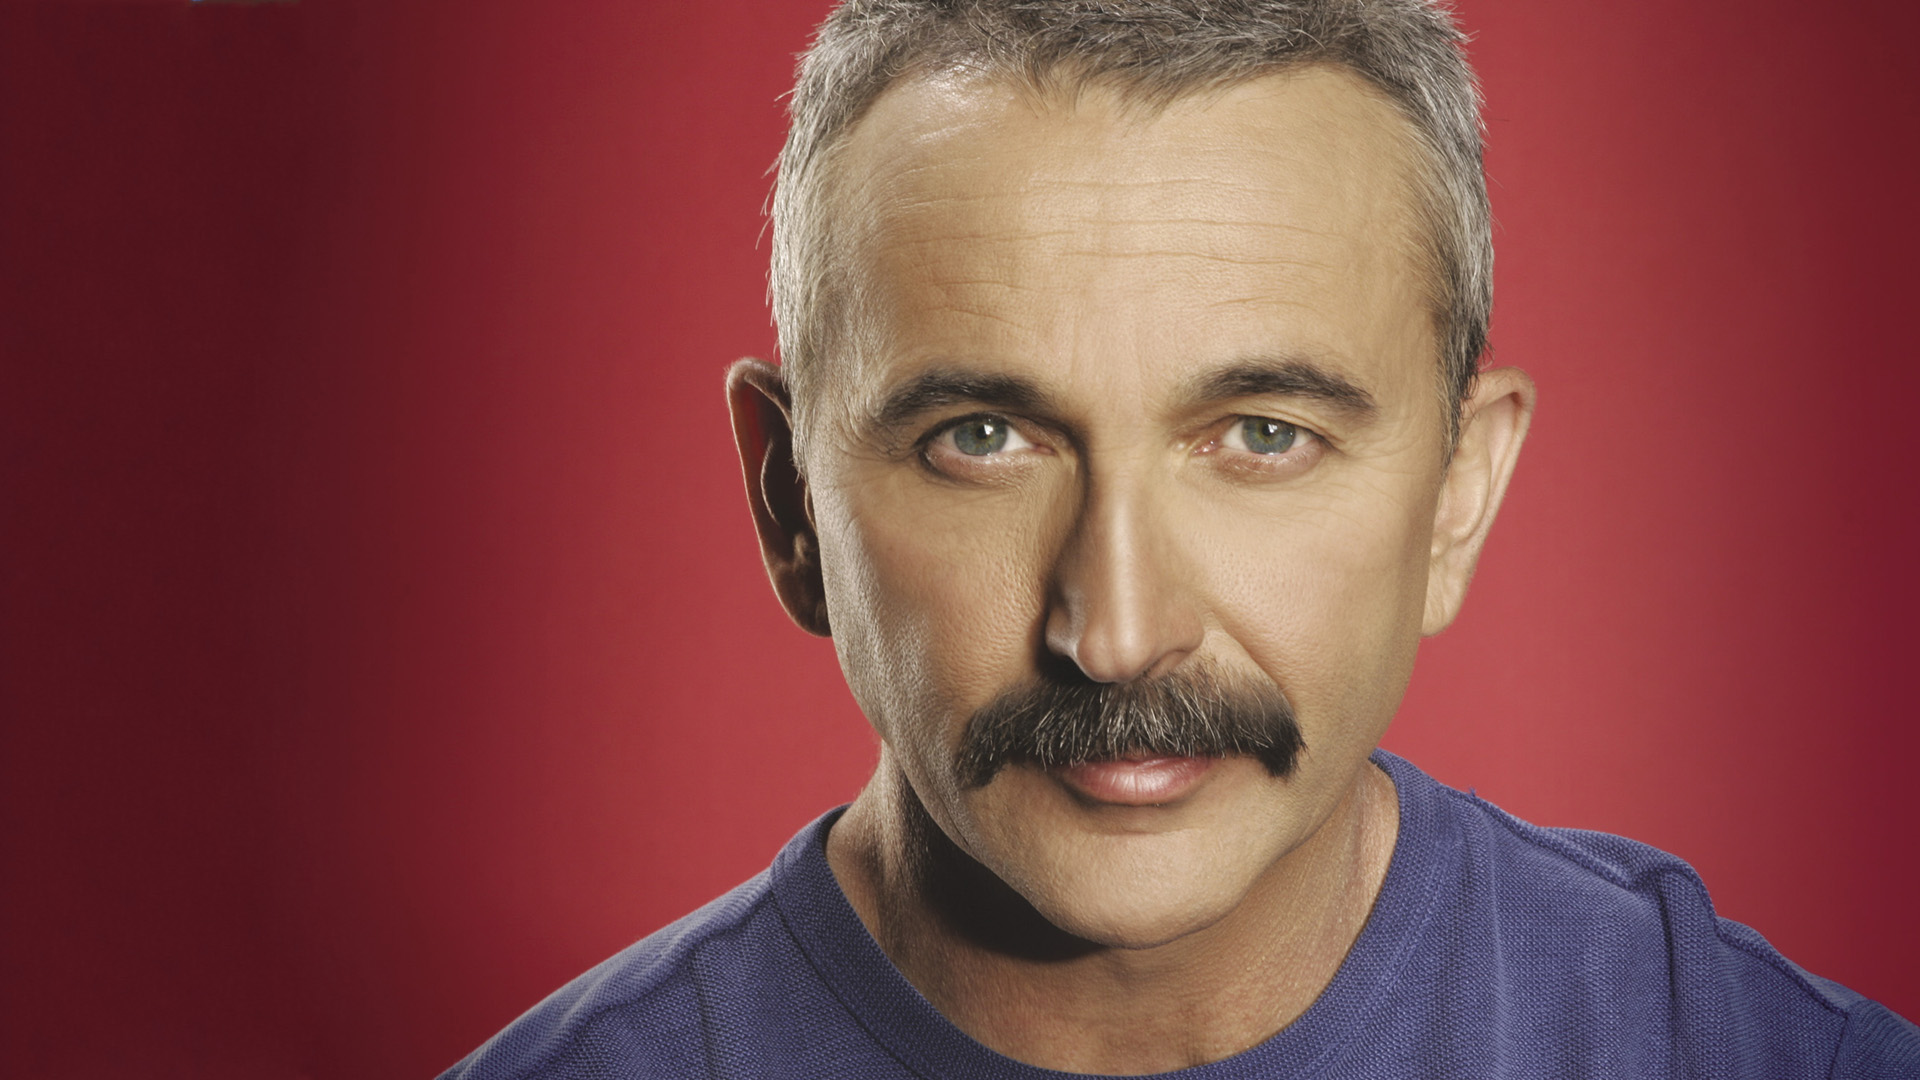 You've Got To Stand For Something av Aaron Tippin